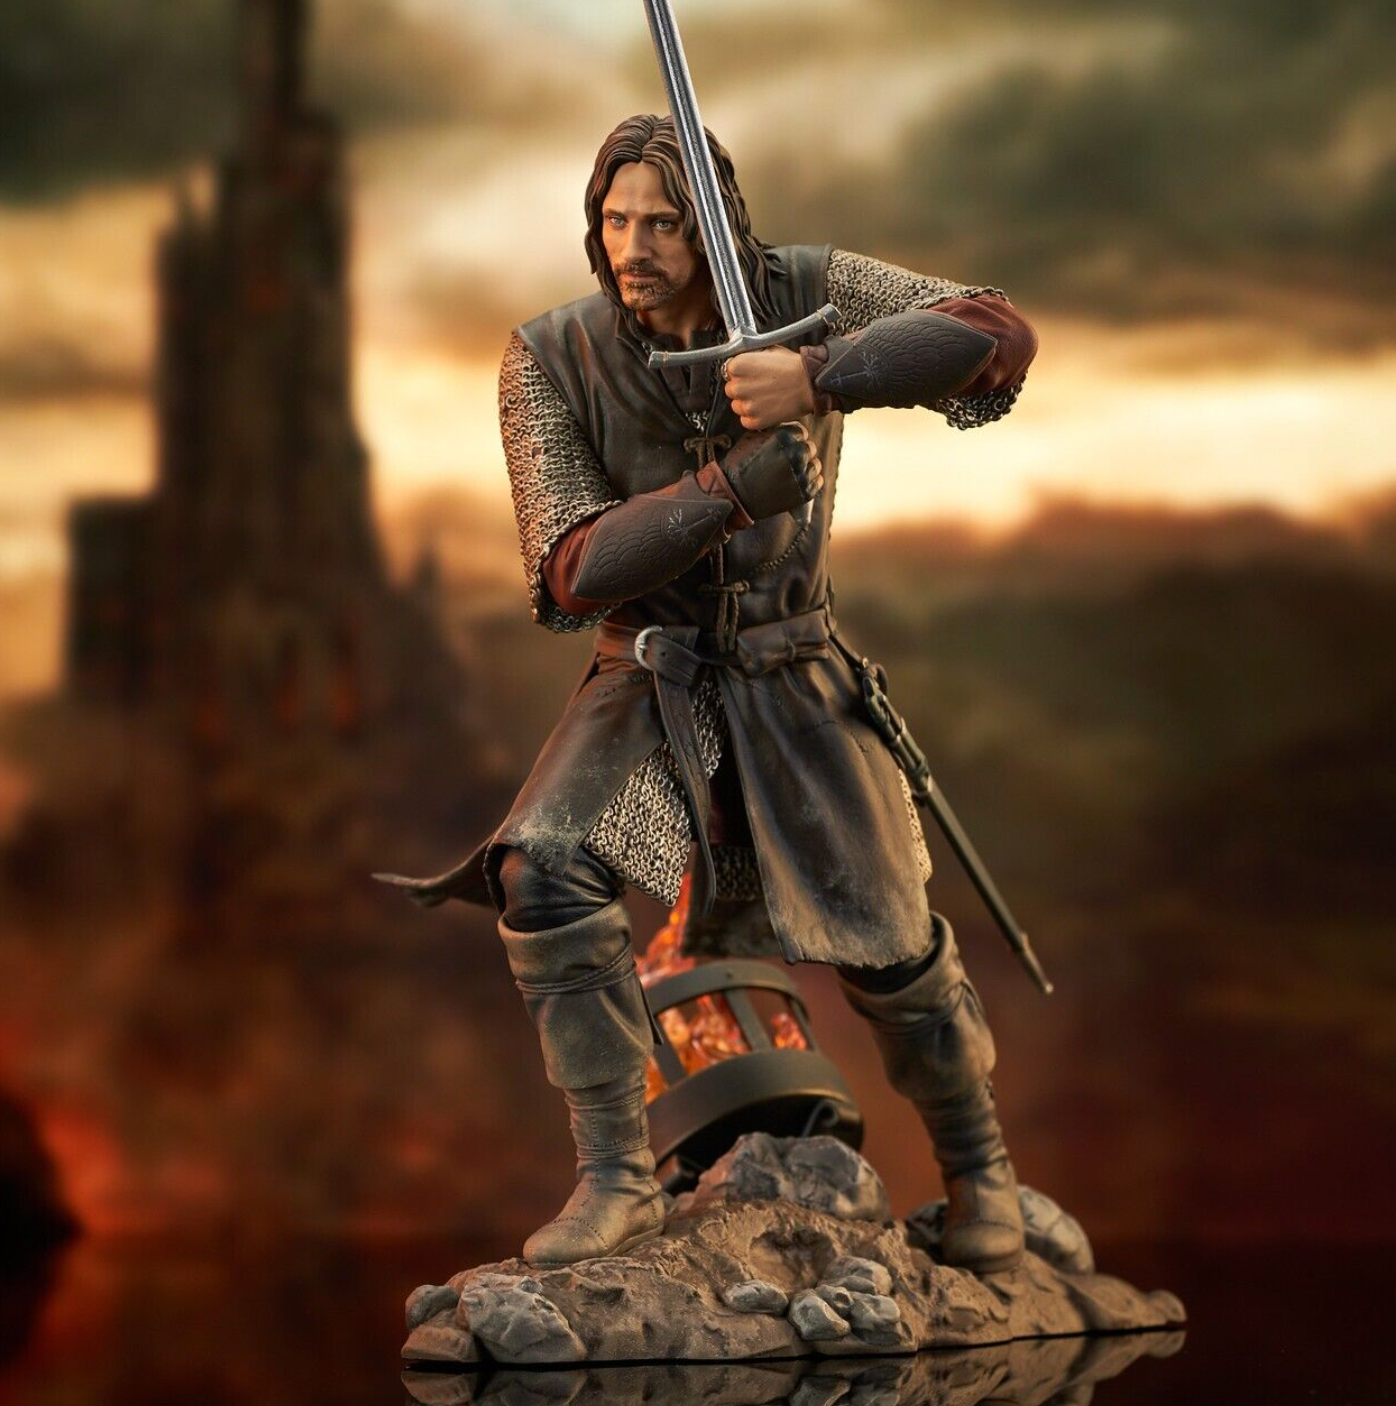 Lord of the Rings Aragorn Statues